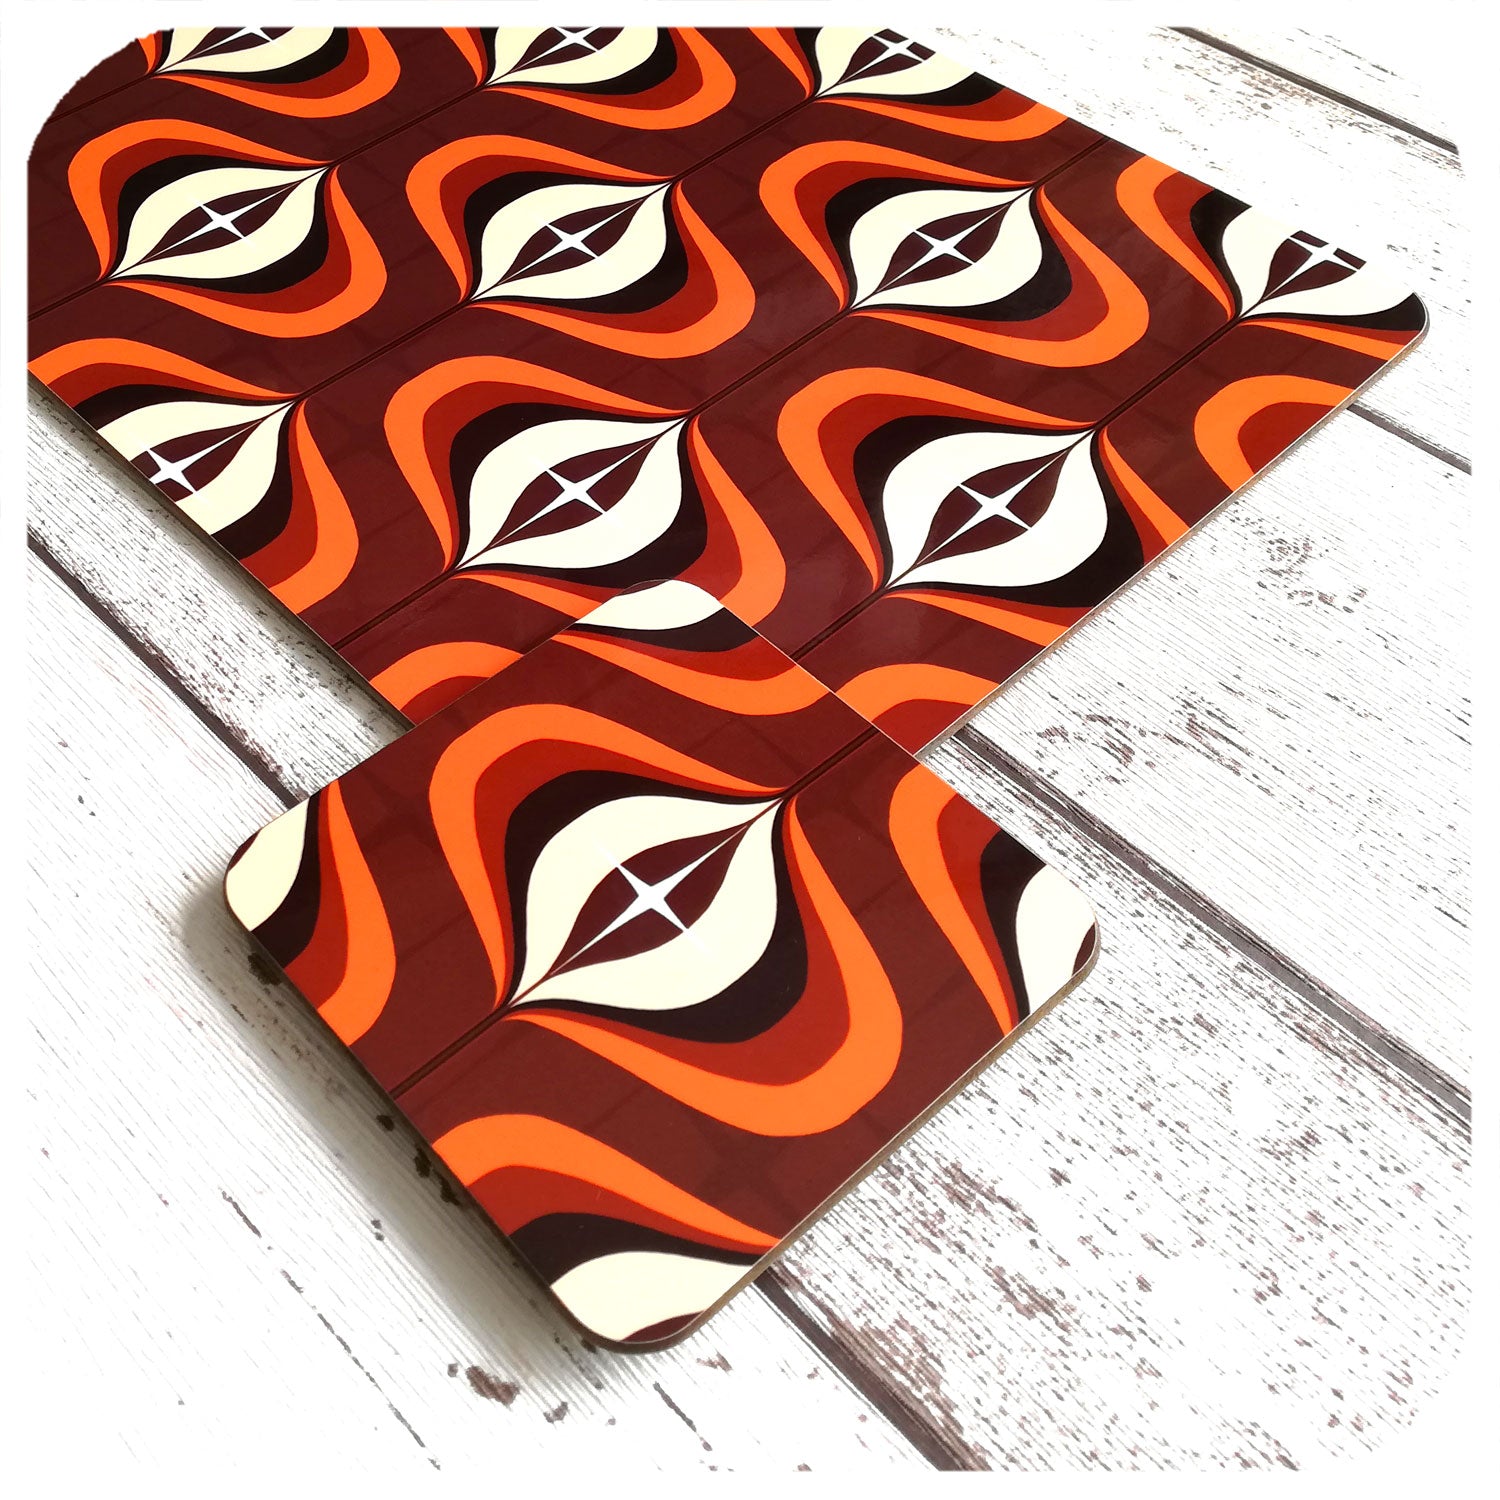 70s style Op Art Placemat & matching Coaster in Orange & Brown, close up at a jaunty angle | The Inkabilly Emporium